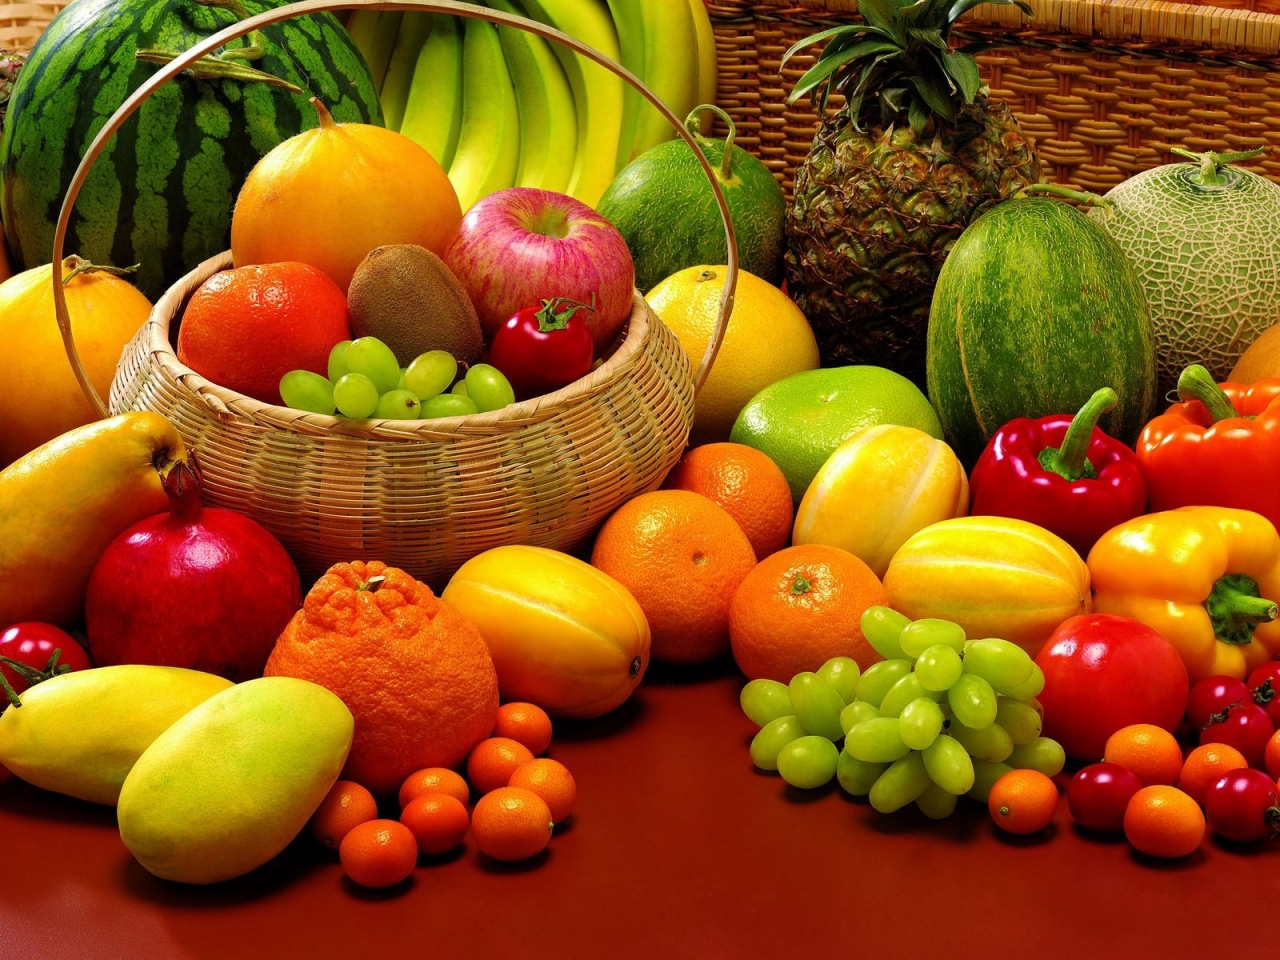 Fruits and Veggies for 1280 x 960 resolution